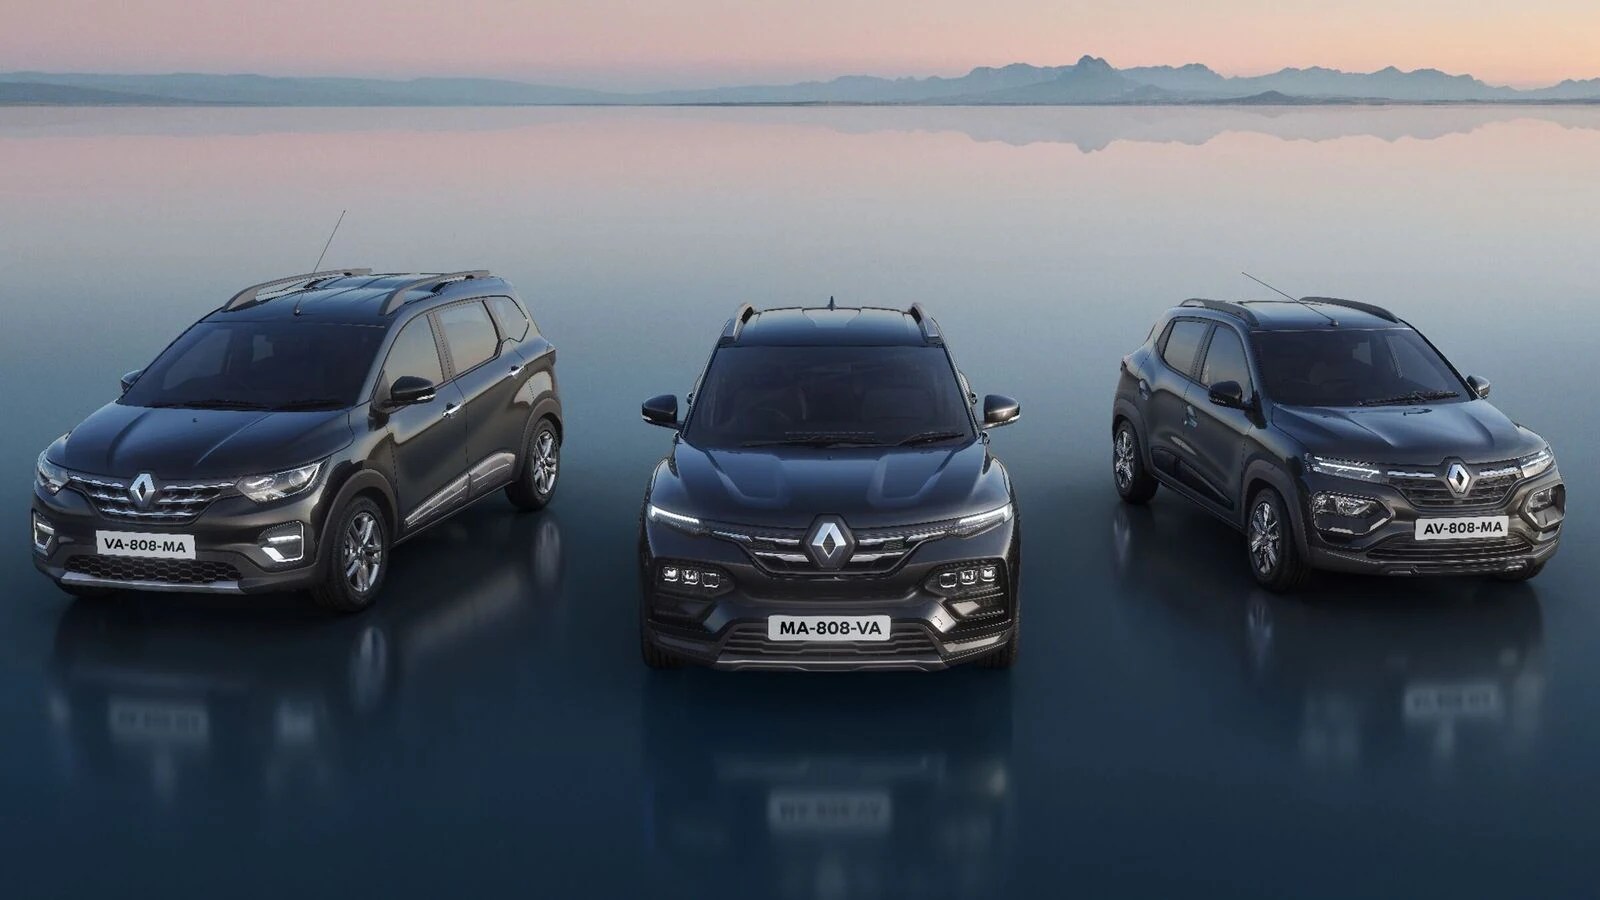 Kwid to Kiger: Renault offers discount of up to ₹40,000 on all cars in July MediaInsights.in